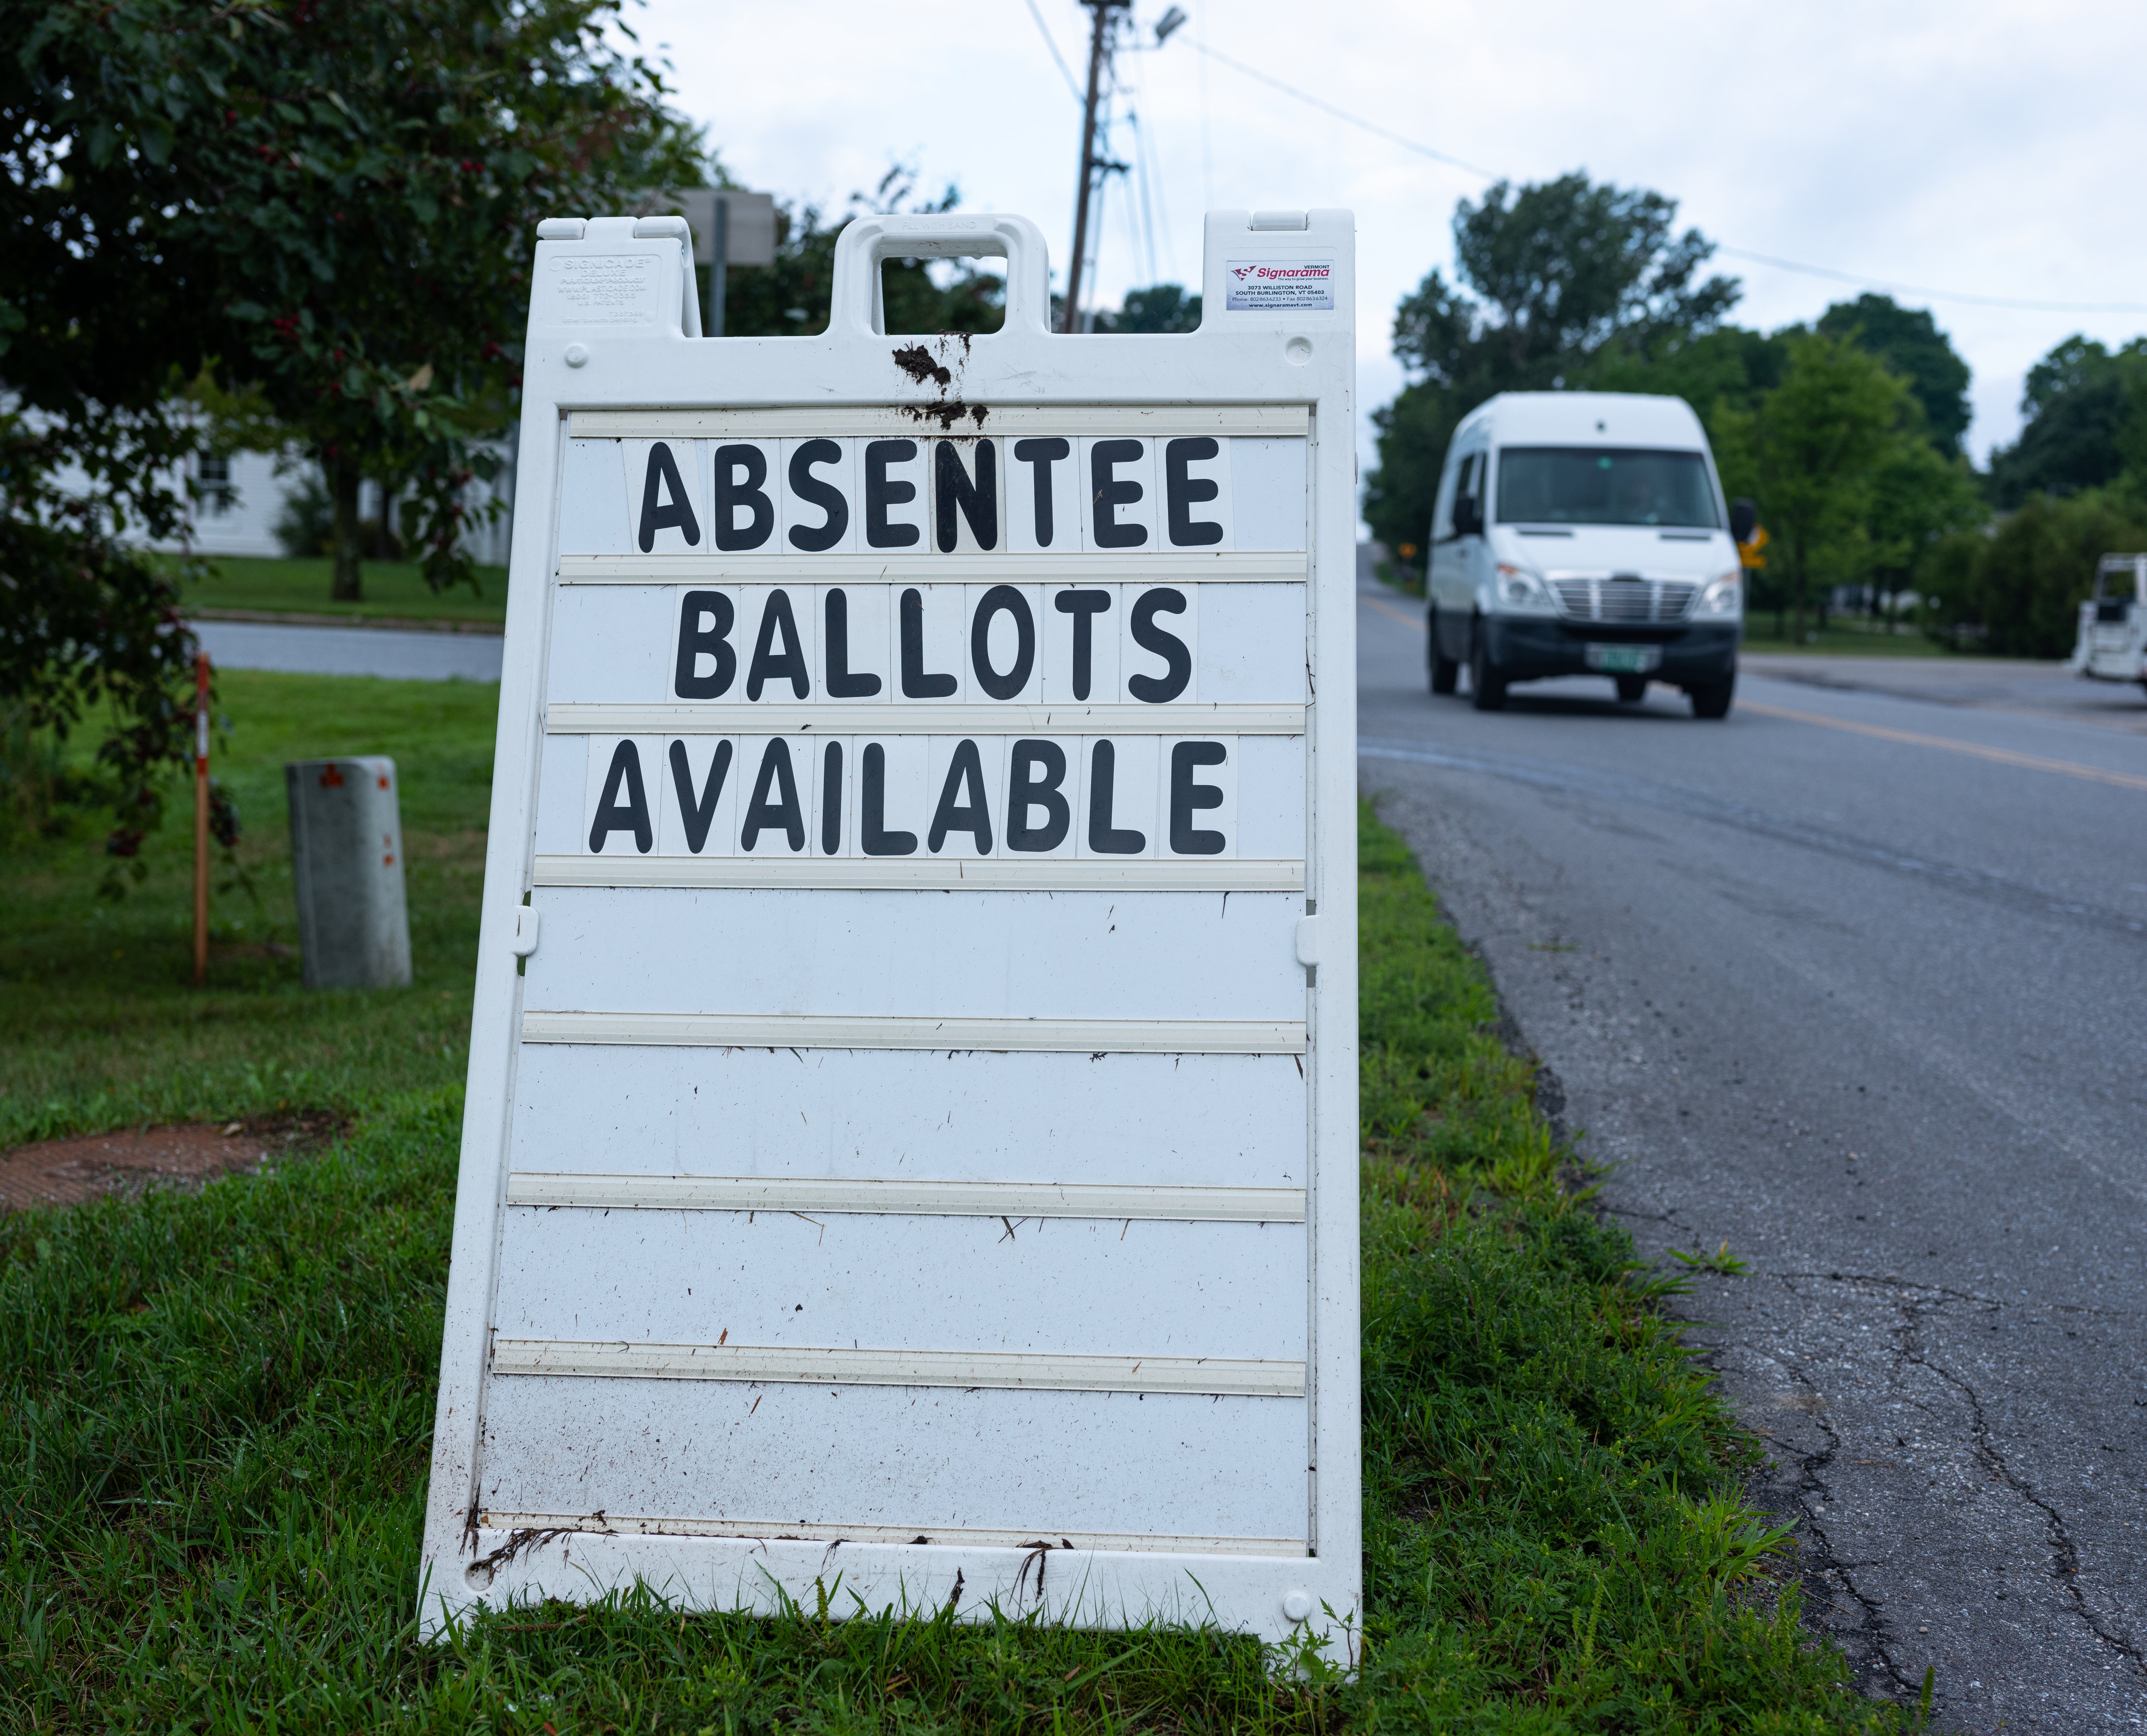 A street sign announces availability of absent ballots for the Vermont primary voting outside of the Town Hall on Aug. 10, 2020 in Charlotte, Vermont. Most states do not have accessible absentee ballot systems. (Robert Nickelsberg—Getty Images)